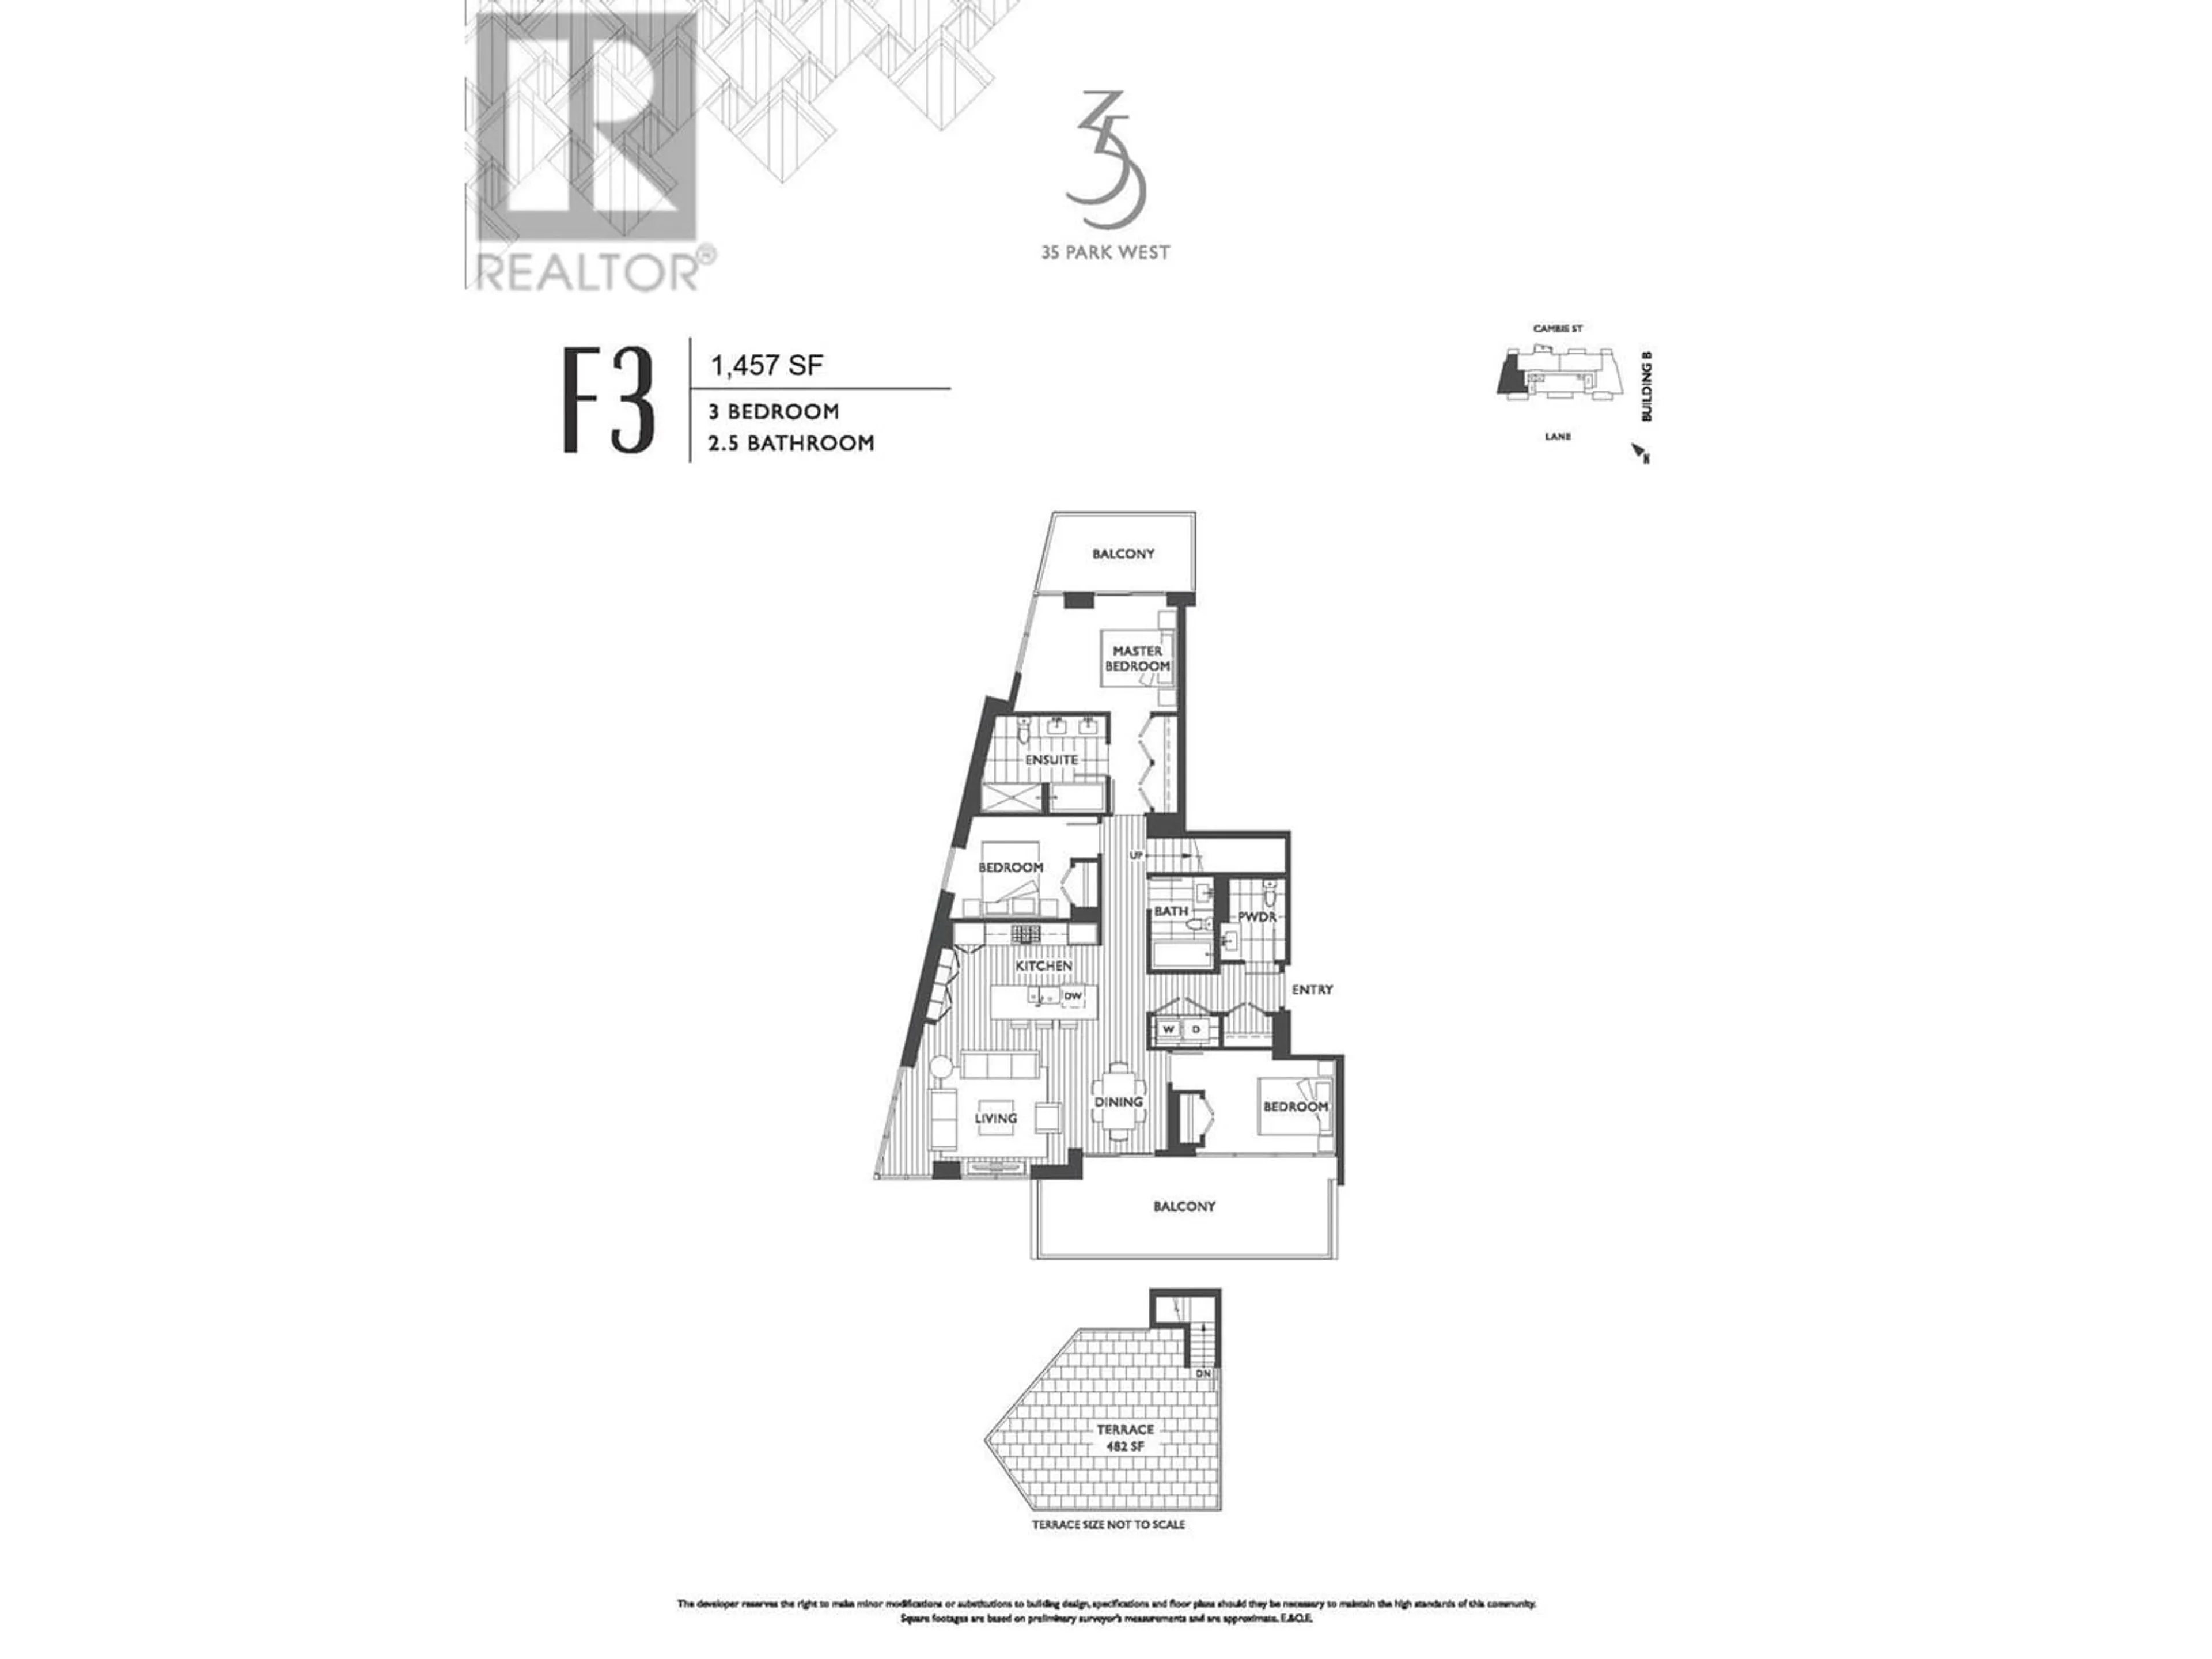 Floor plan for 601 5033 CAMBIE STREET, Vancouver British Columbia V5Z0H6